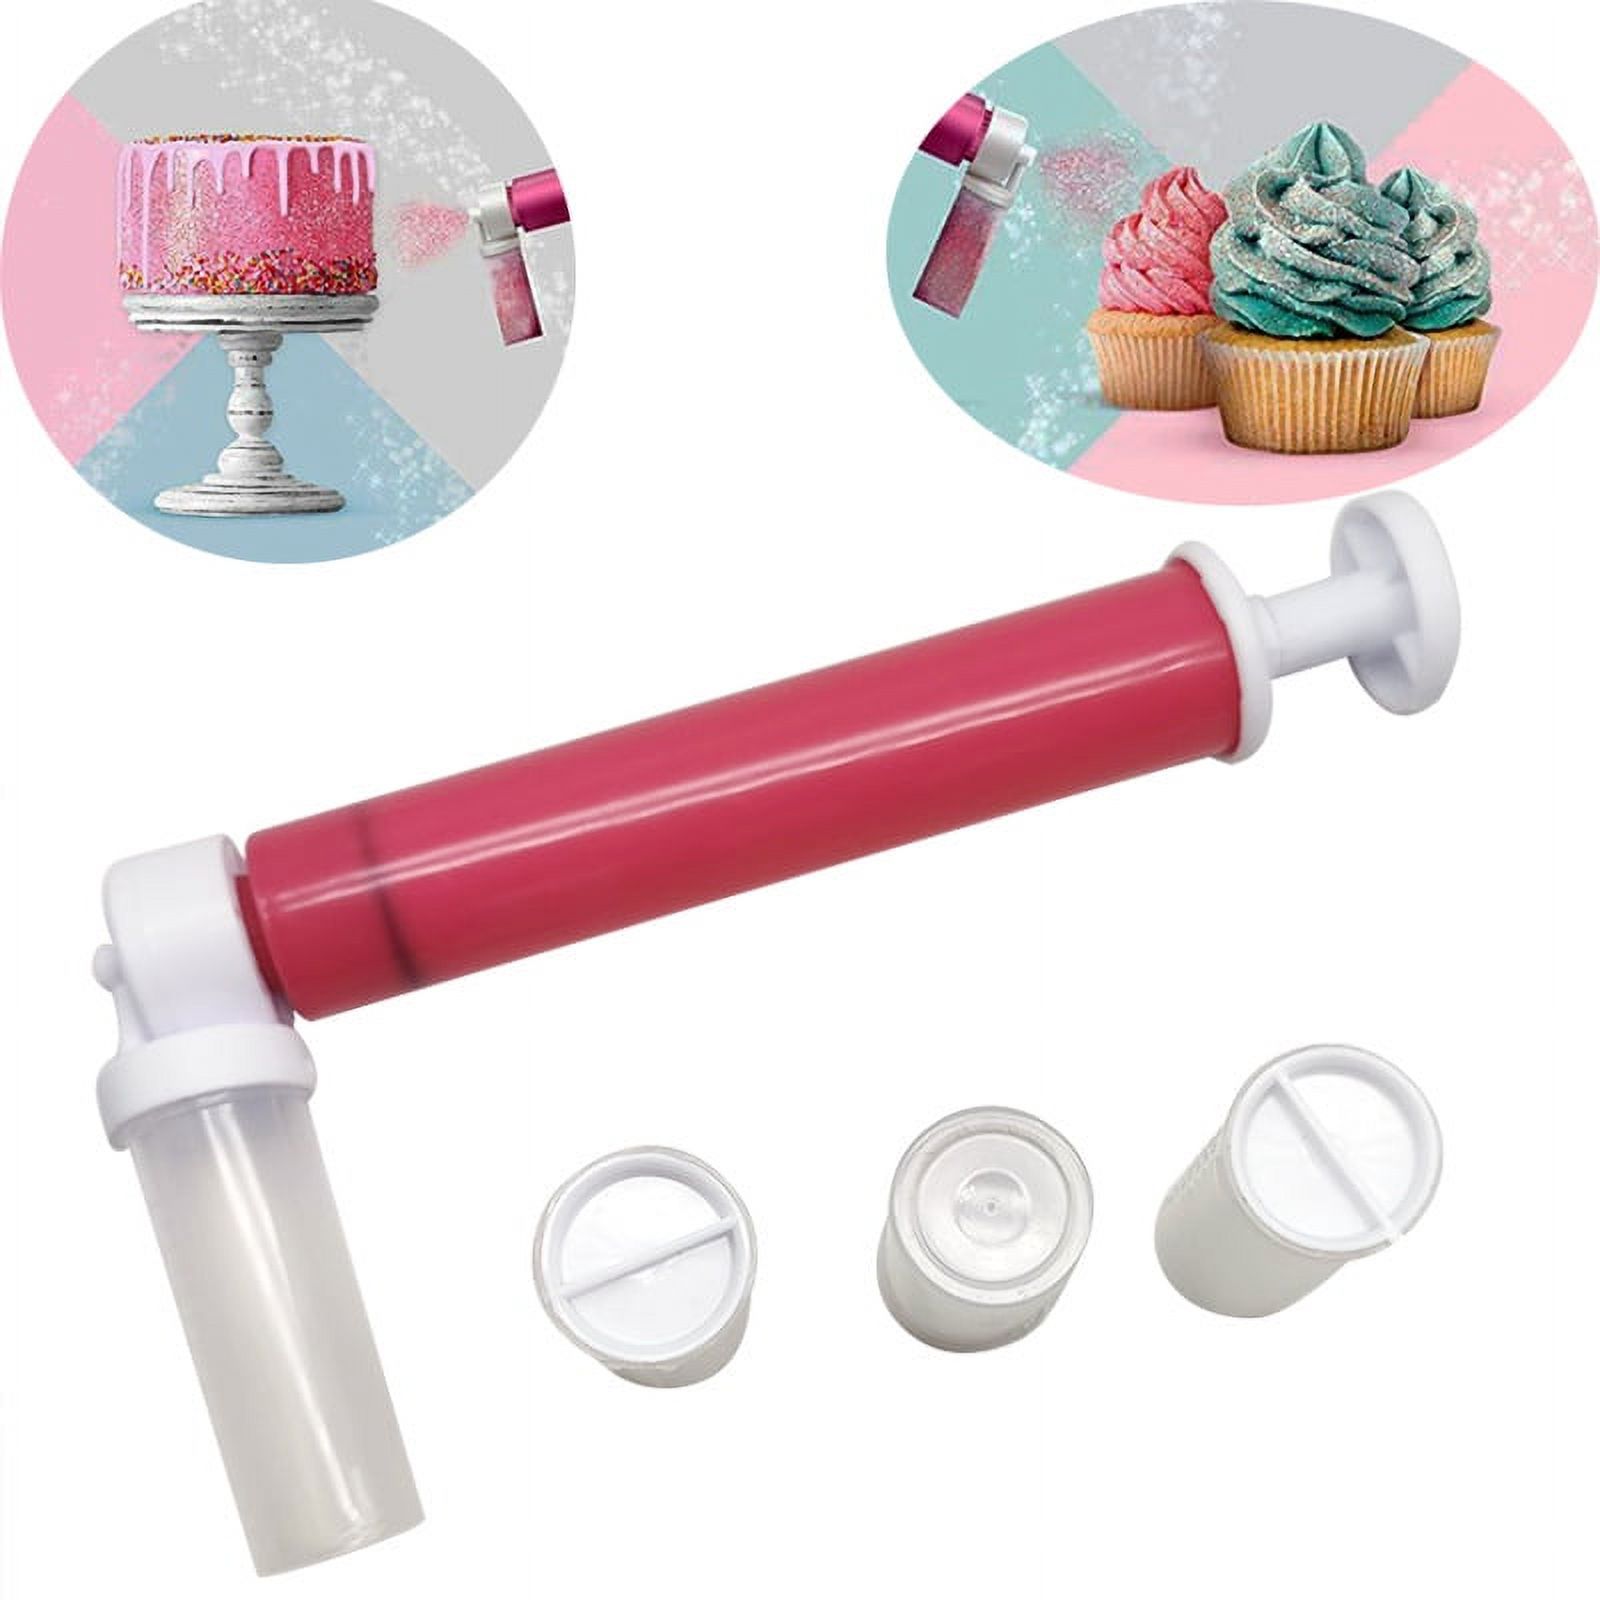 Manual Airbrush for Cake Glitter Decorating Tools, Durable and Easy to  Clean DIY Cake Airbrush makeup kit with 4 Pcs Vial, Glitter Pump for Cakes,  Cupcakes and Desserts Decorating 